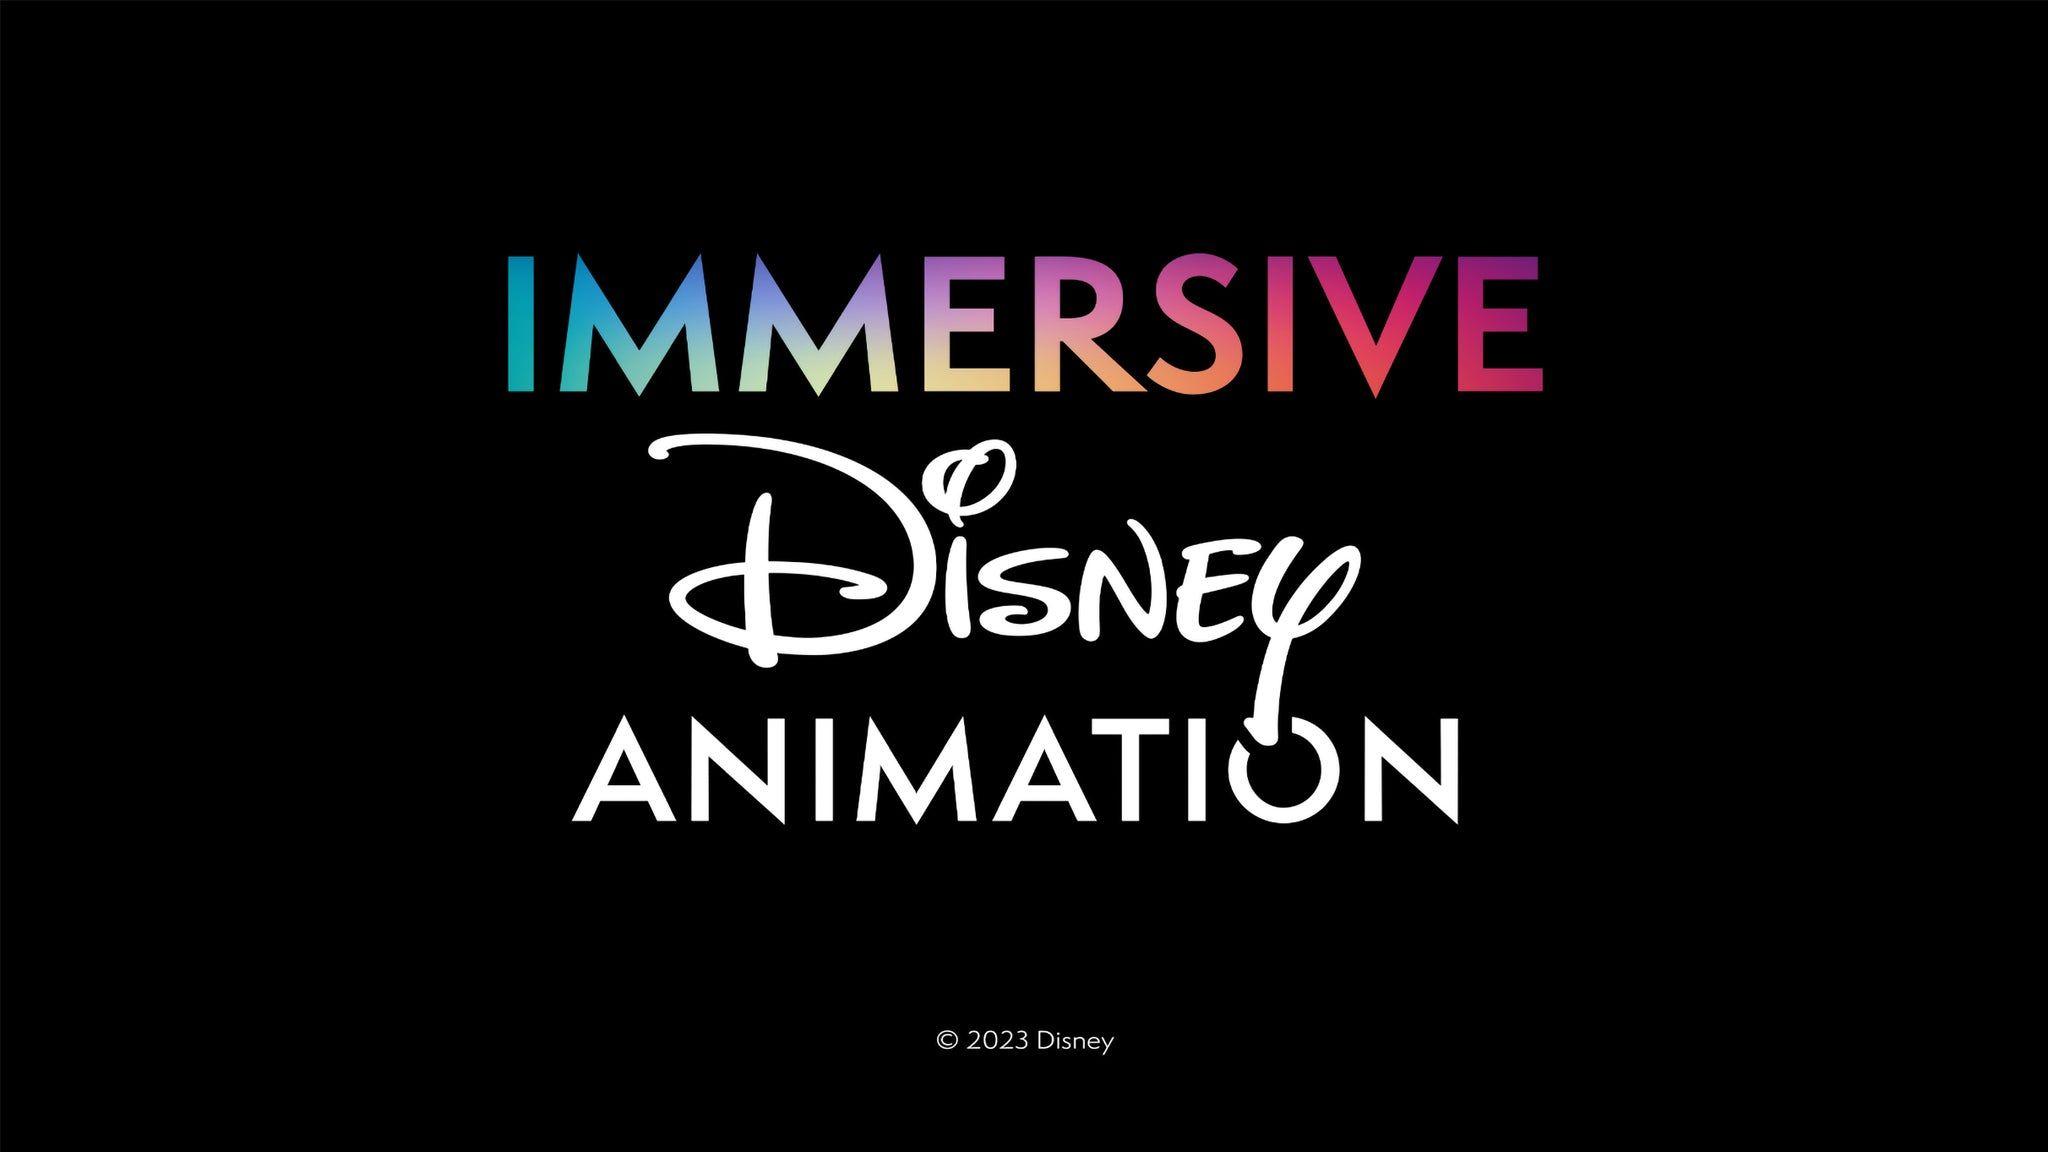 Disney Animation: Immersive Experience - Montreal